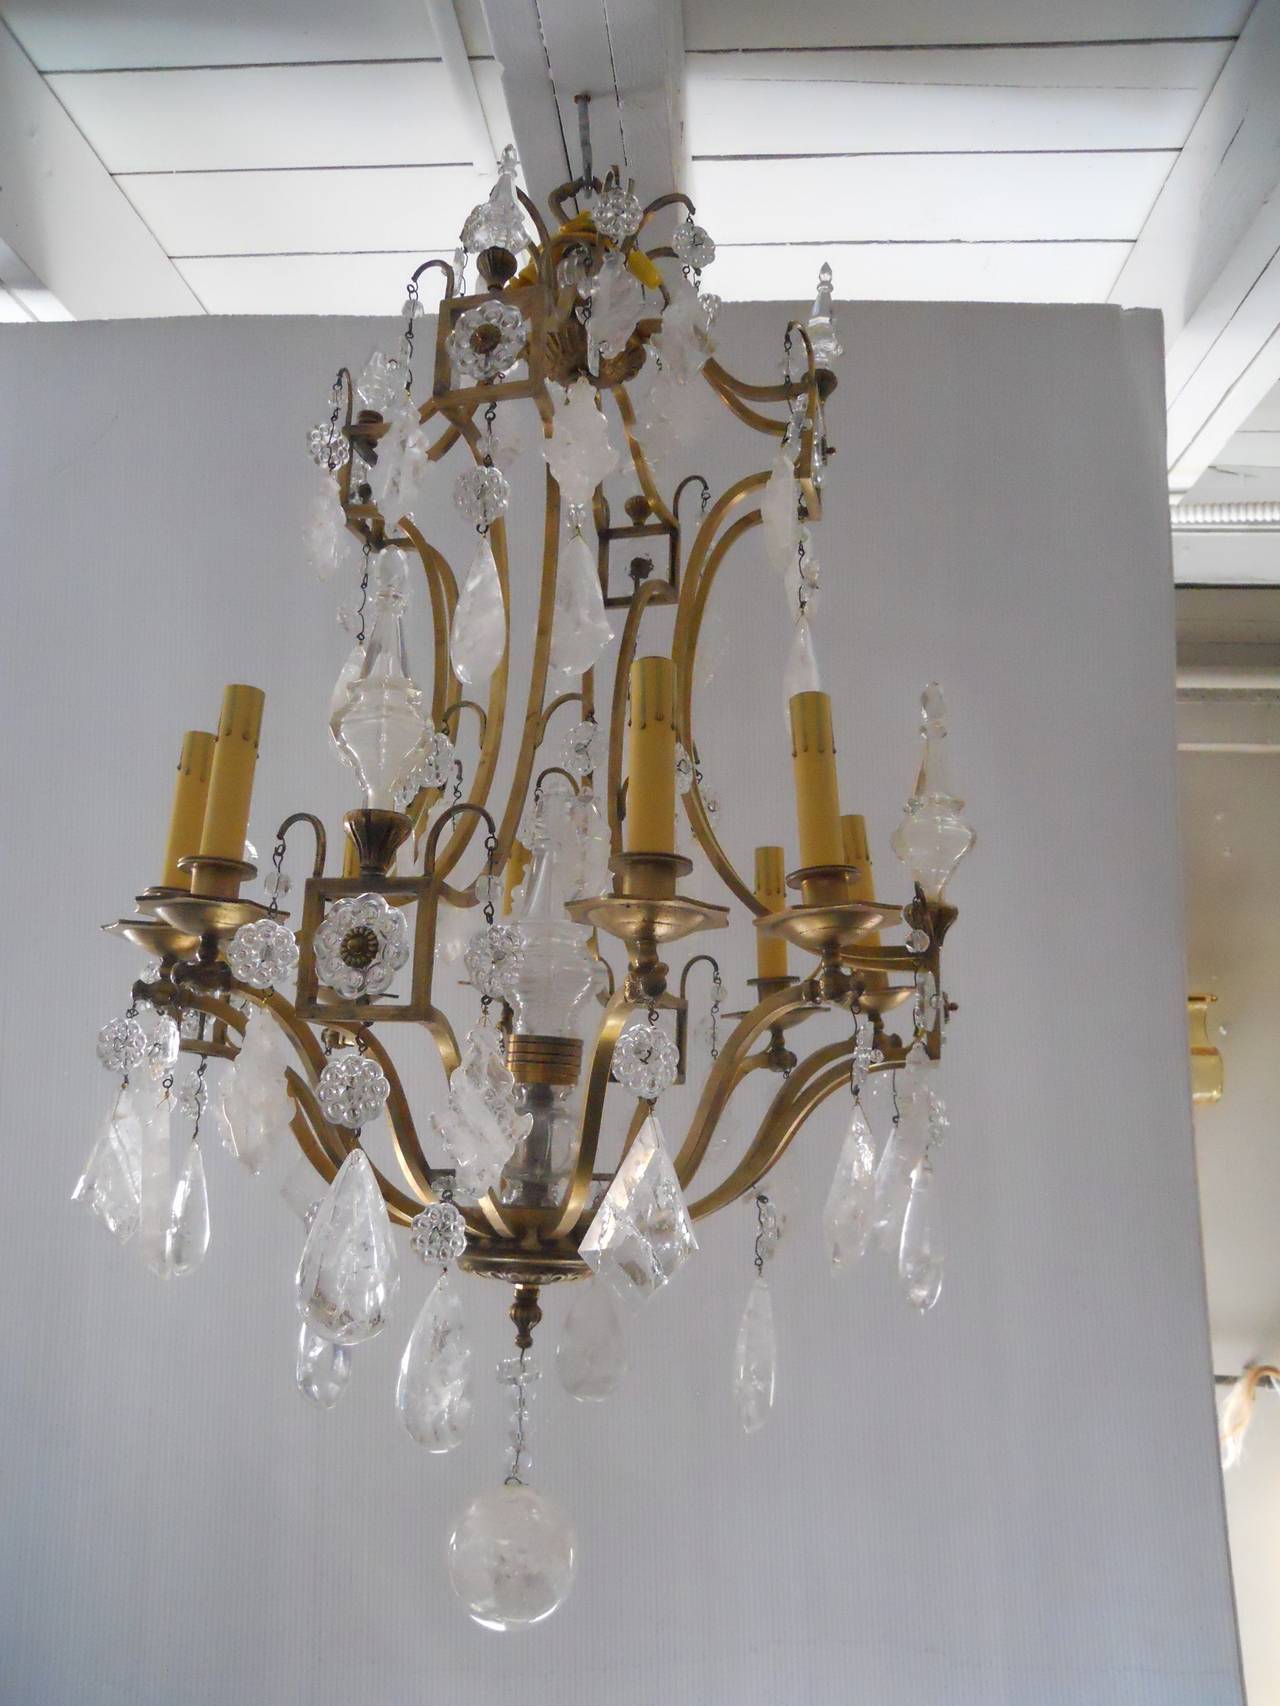 Beautiful French rock crystal chandelier.
Already rewired for U.S.
Eight lights.